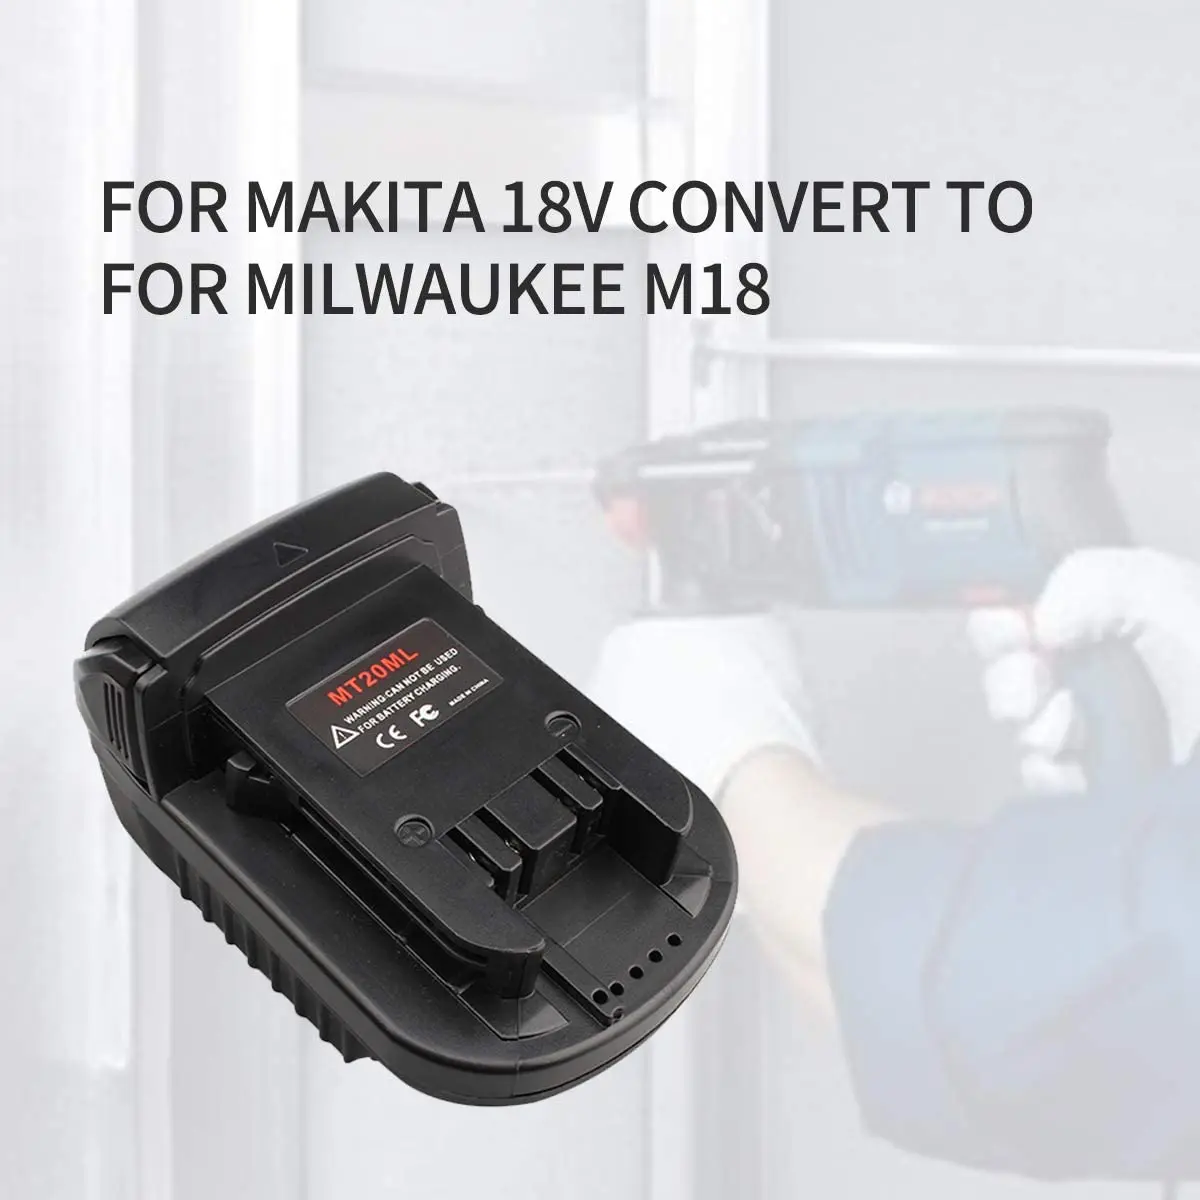 MT20ML Adapter for Makita 18V Li-ion Battery BL1830 BL1860 BL1815 Convert to for Milwaukee M18 Lithium Battery enlarge